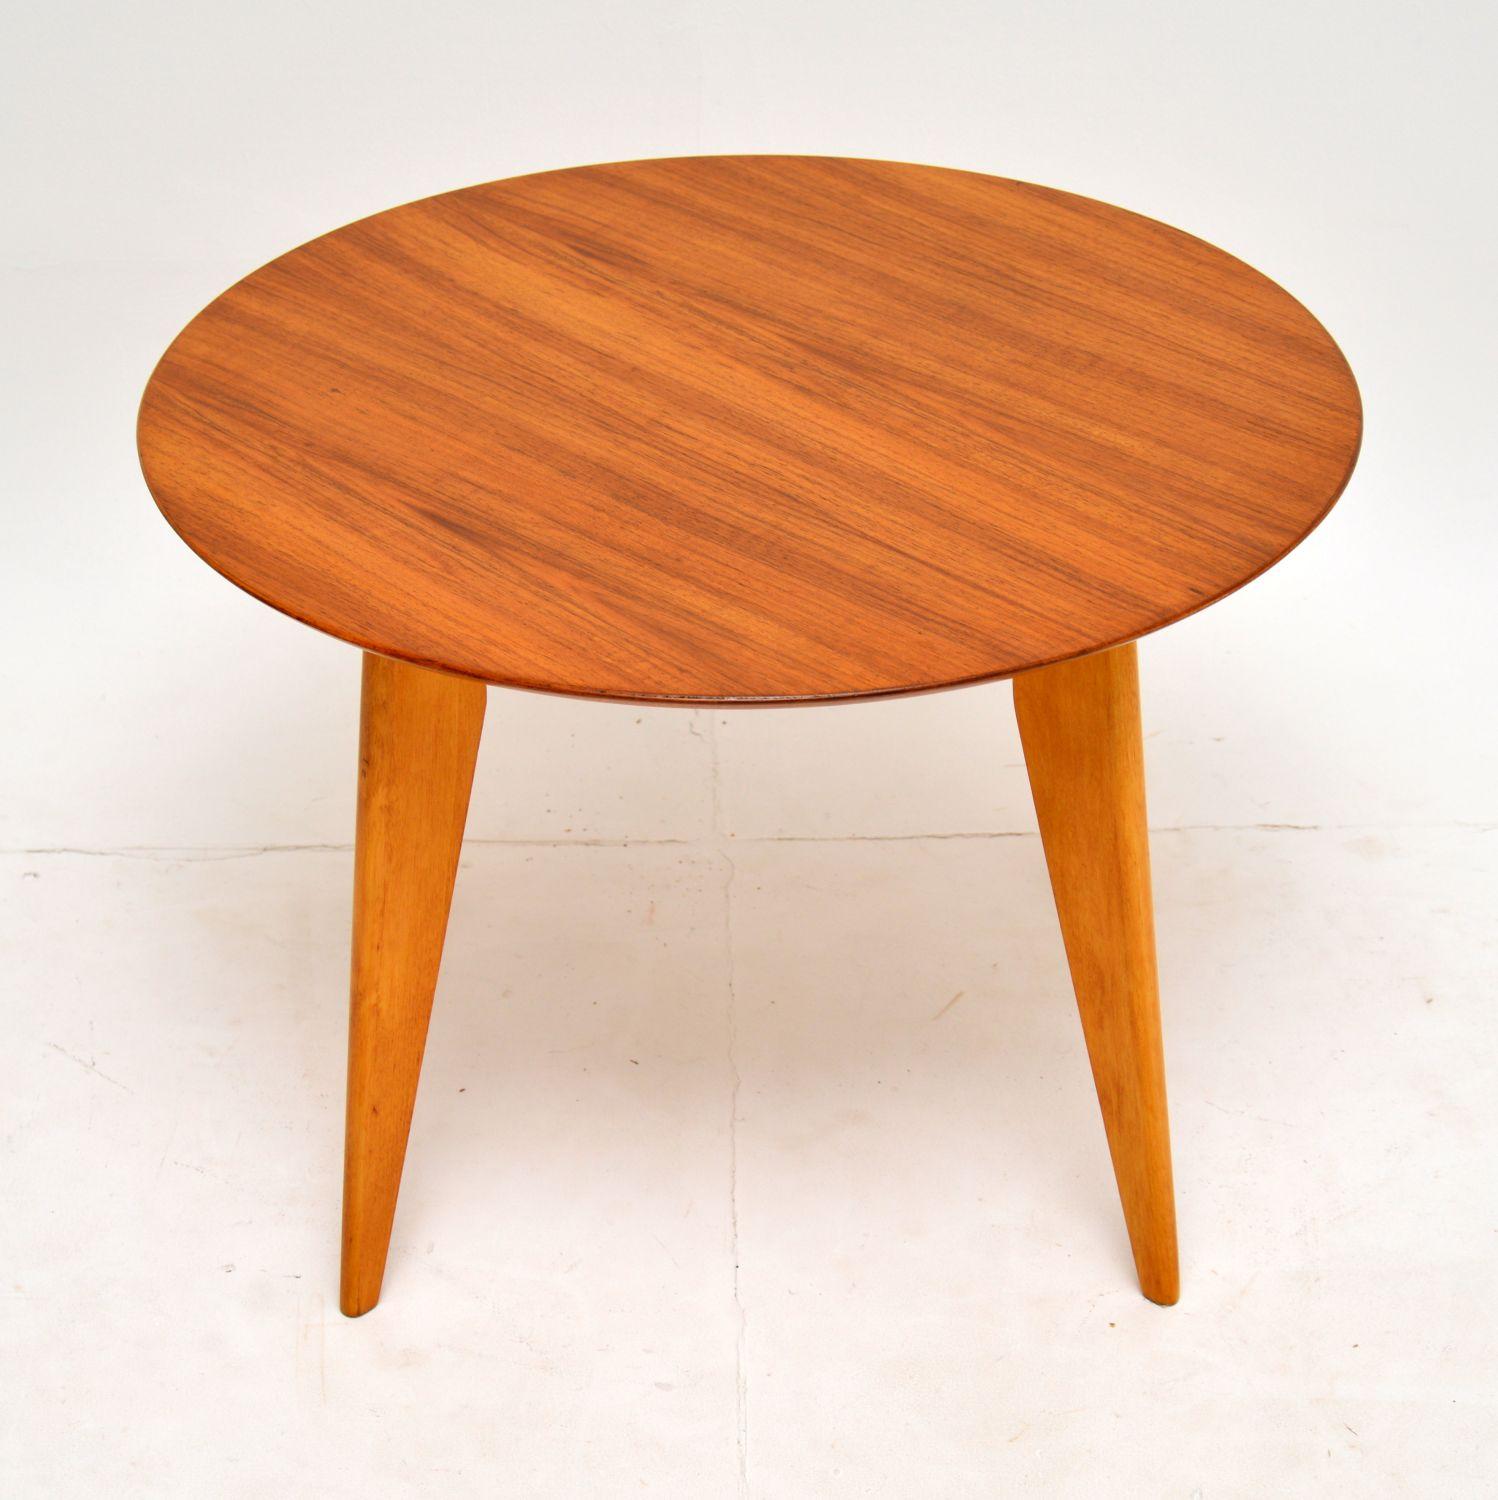 A smart and stylish vintage coffee table or side table in walnut. This was made by H. Shaw of London, it dates from the 1960’s.

This has a beautifully made circular top, and sits on fine splayed solid wood legs. The makers label can be seen below